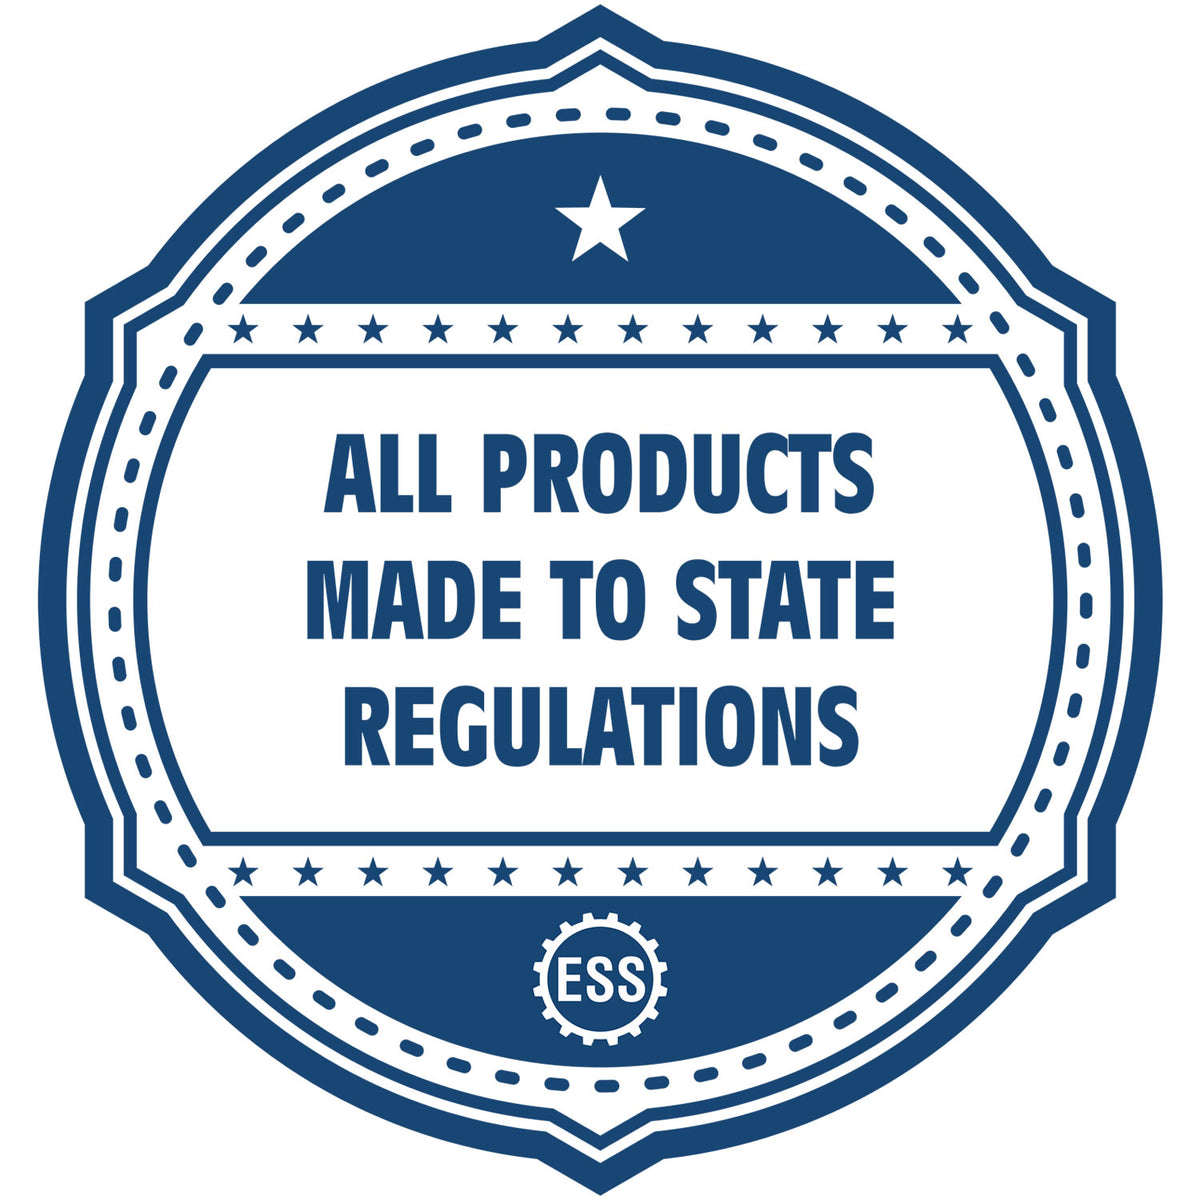 A blue icon or badge for the Hybrid Kansas Engineer Seal showing that this product is made in compliance with state regulations.